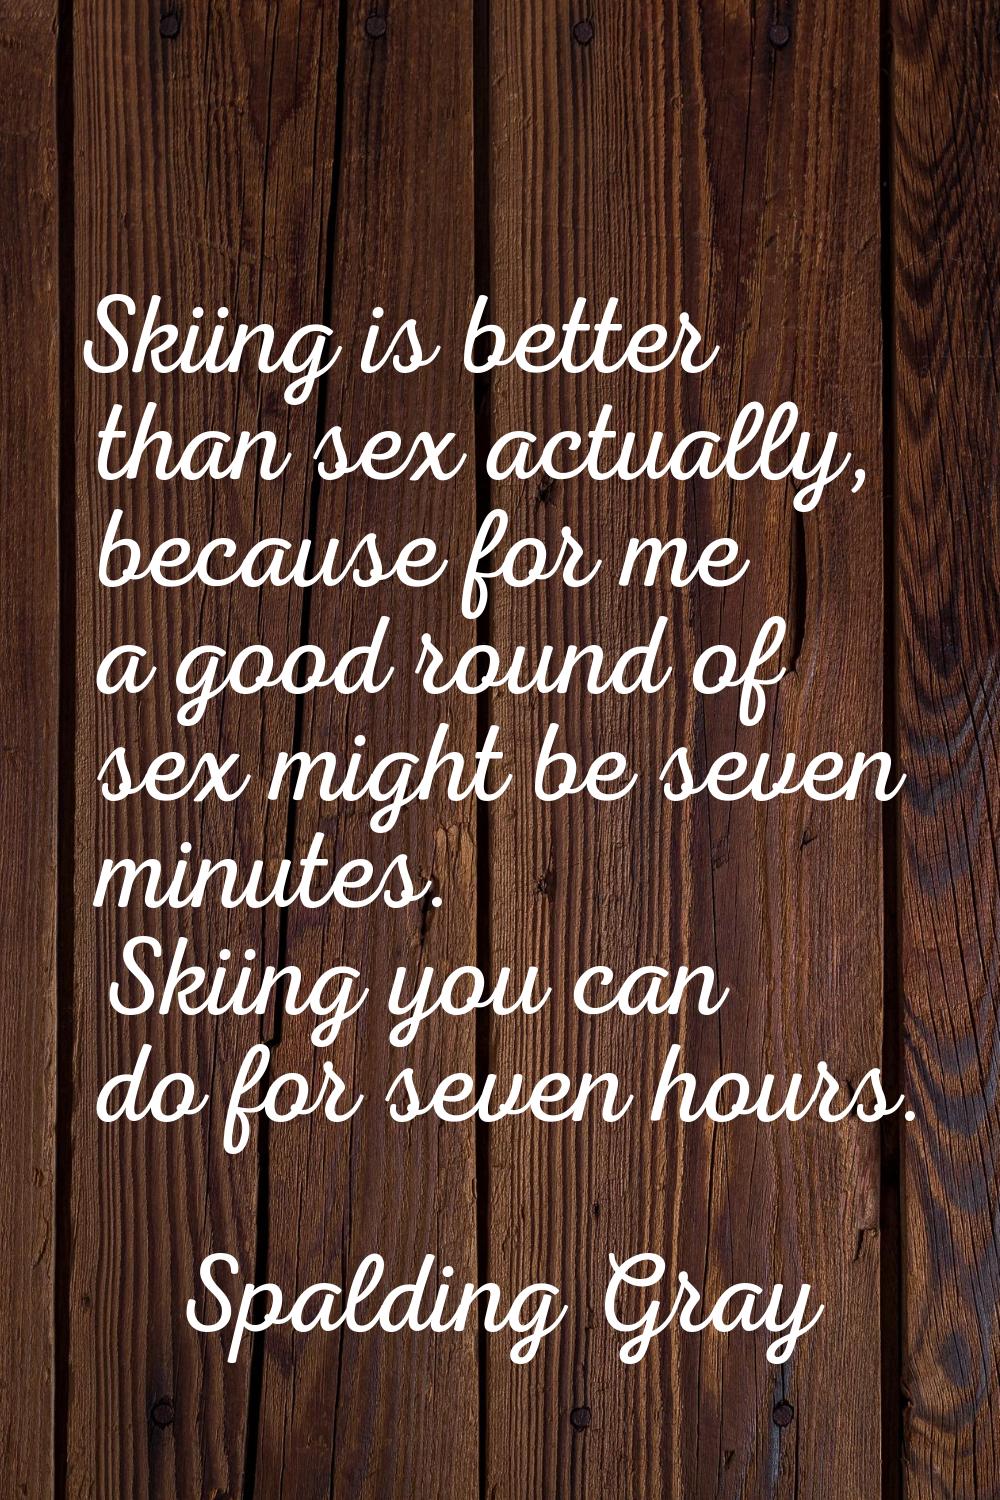 Skiing is better than sex actually, because for me a good round of sex might be seven minutes. Skii